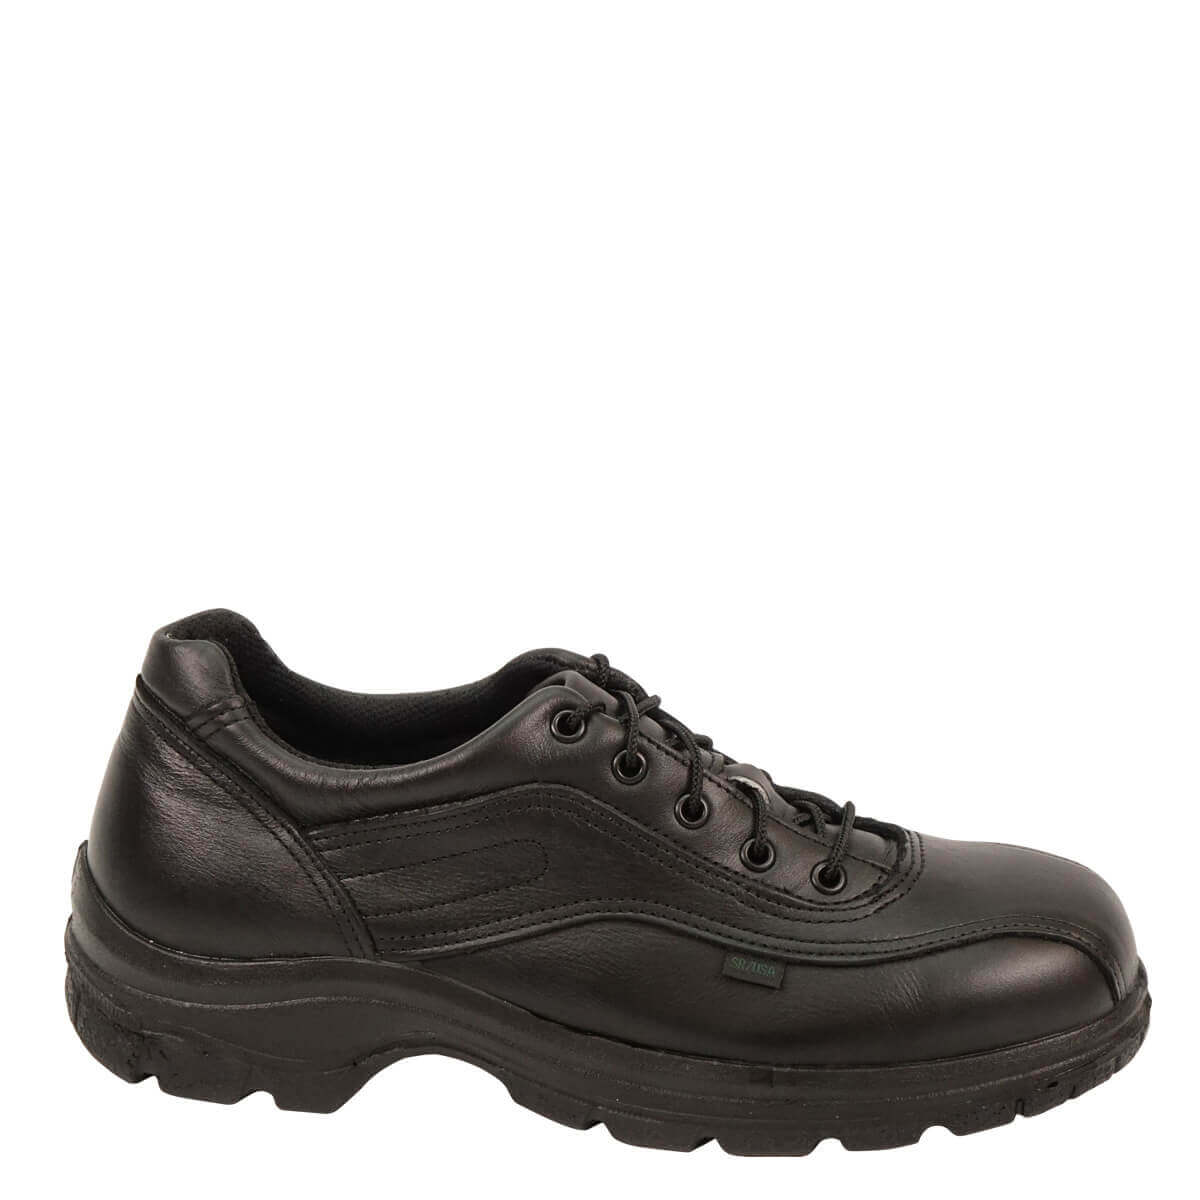 Men's Thorogood SOFT STREETS™ SERIES – DOUBLE TRACK OXFORD